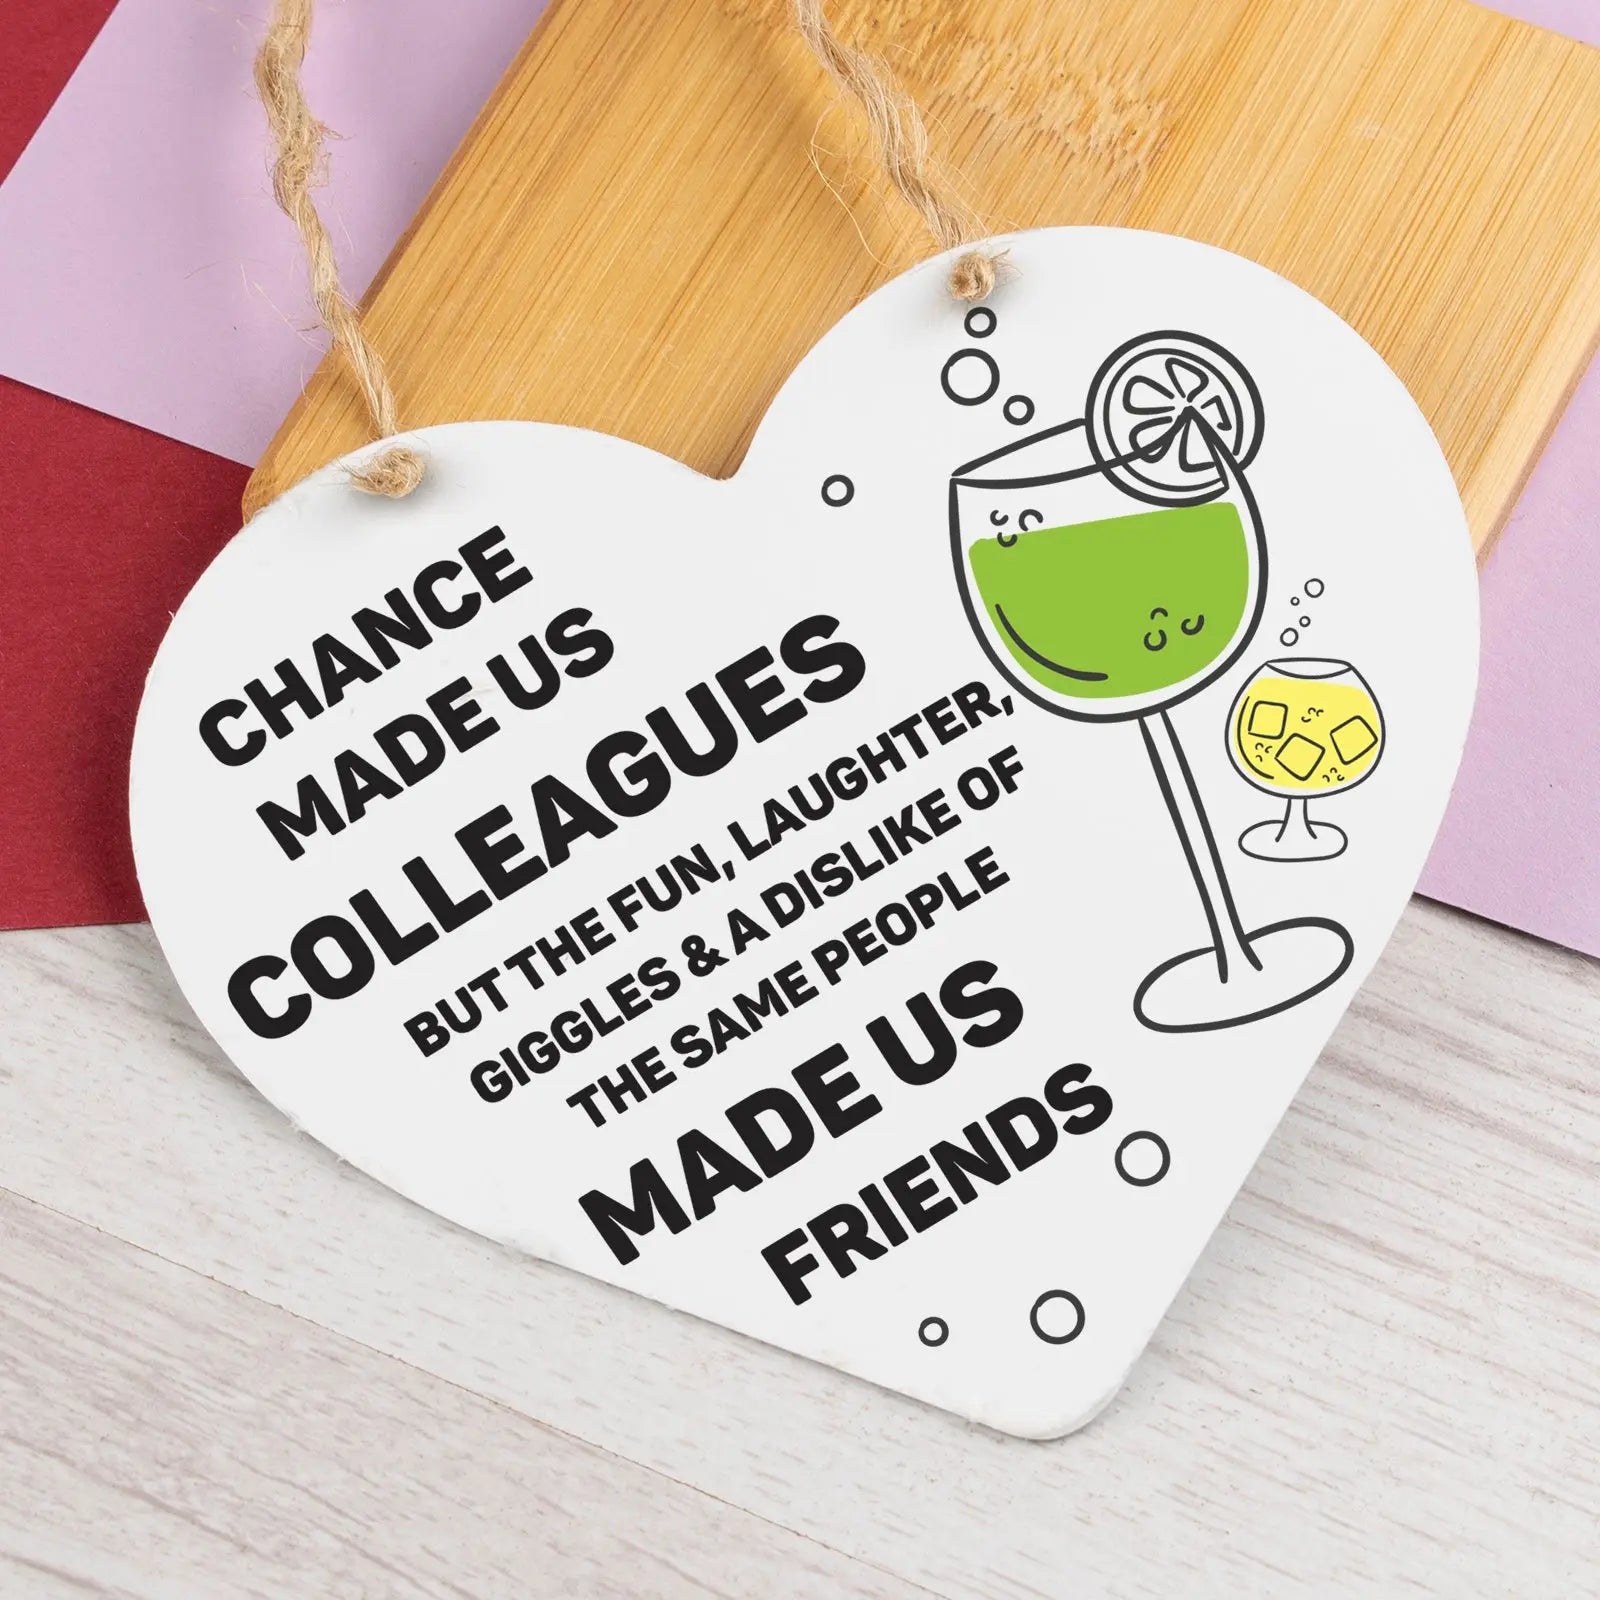 Chance Made Us Colleagues Gifts Heart Plaque Hanging Sign Friendship Friends